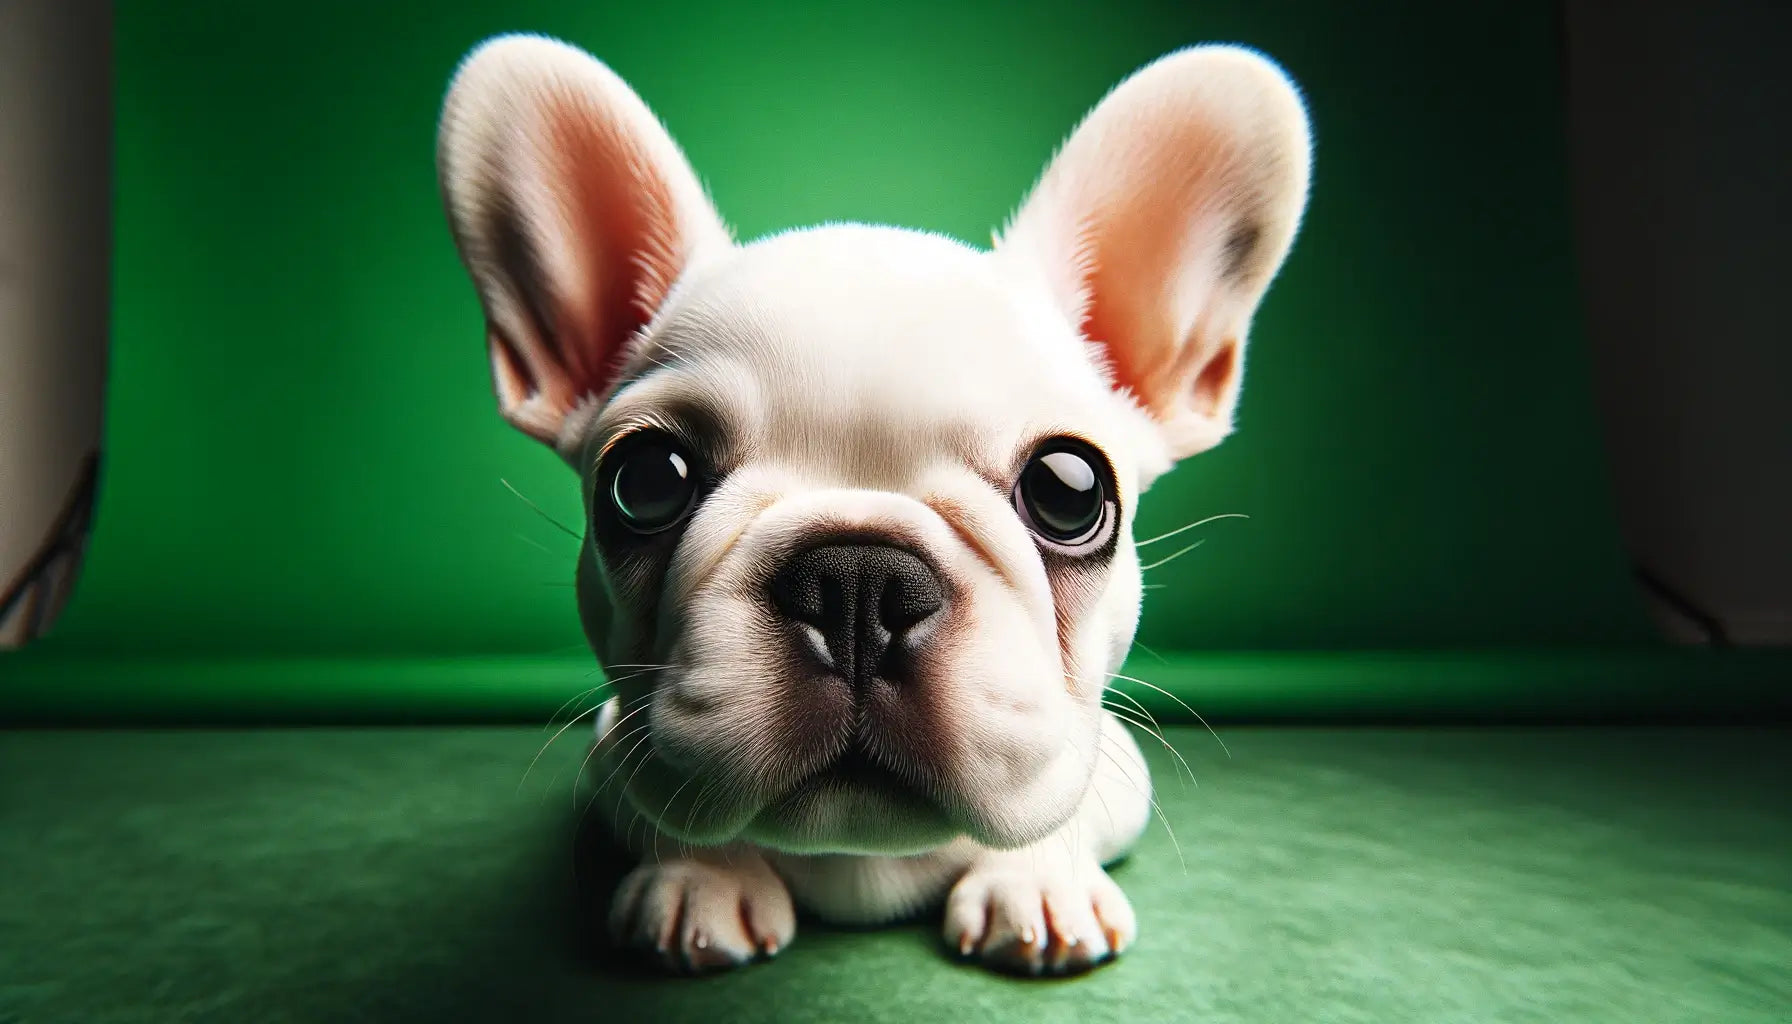 White French Bulldog puppy's face making direct eye contact with the camera.